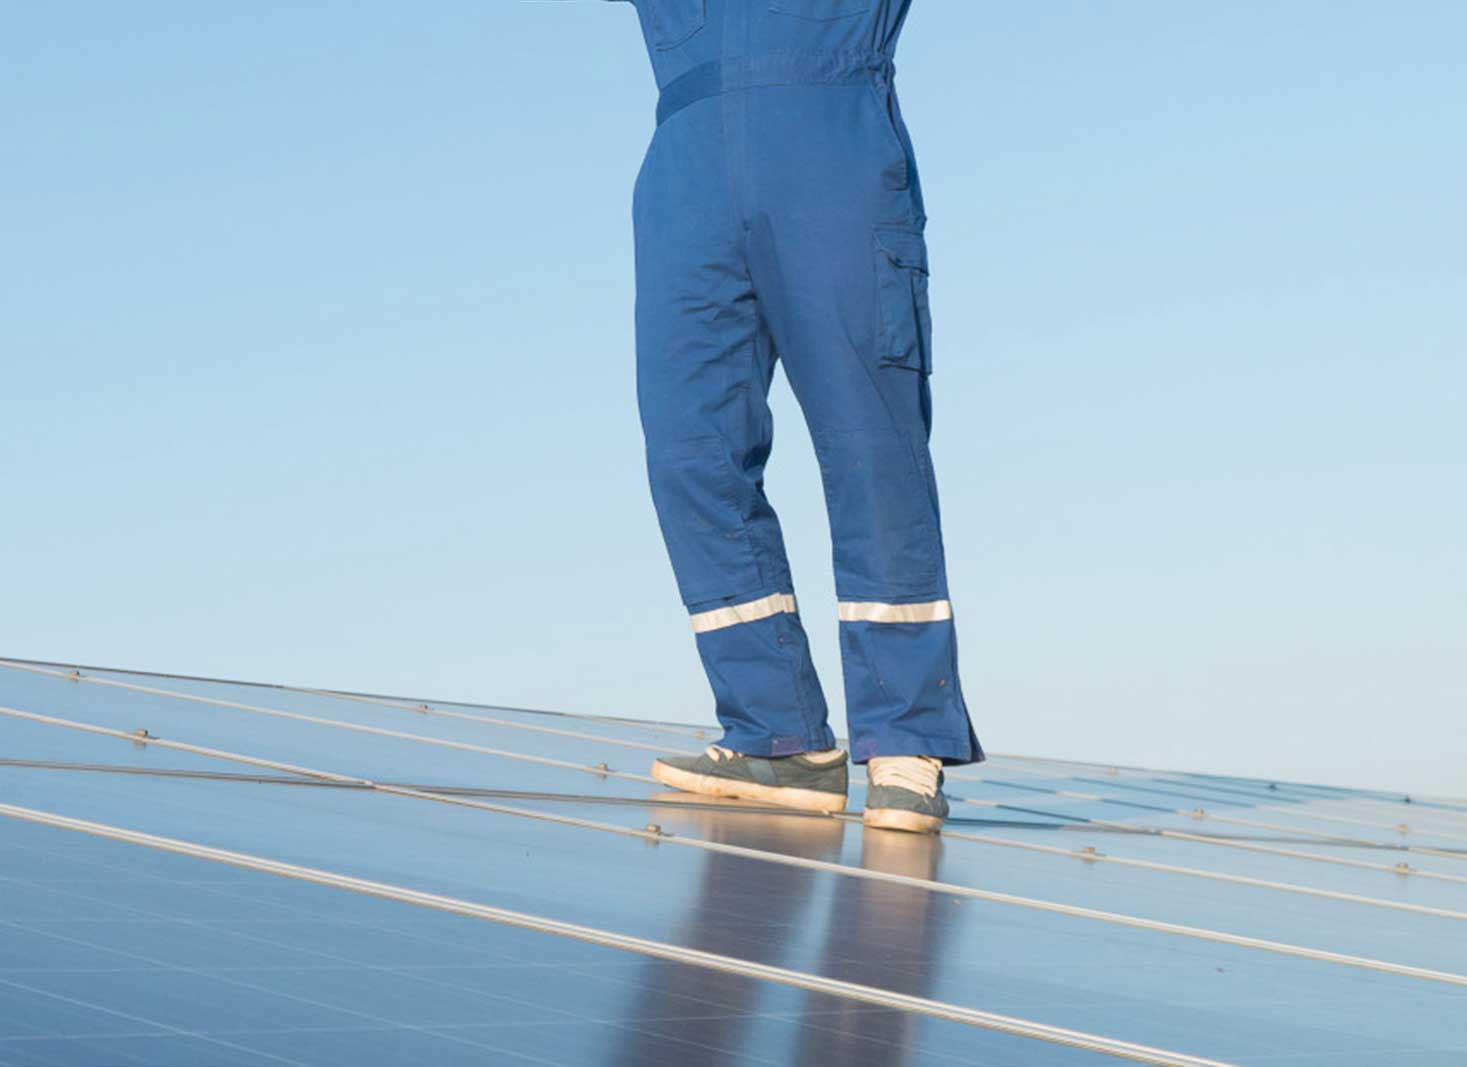 How can solar panels get damaged by walking on them